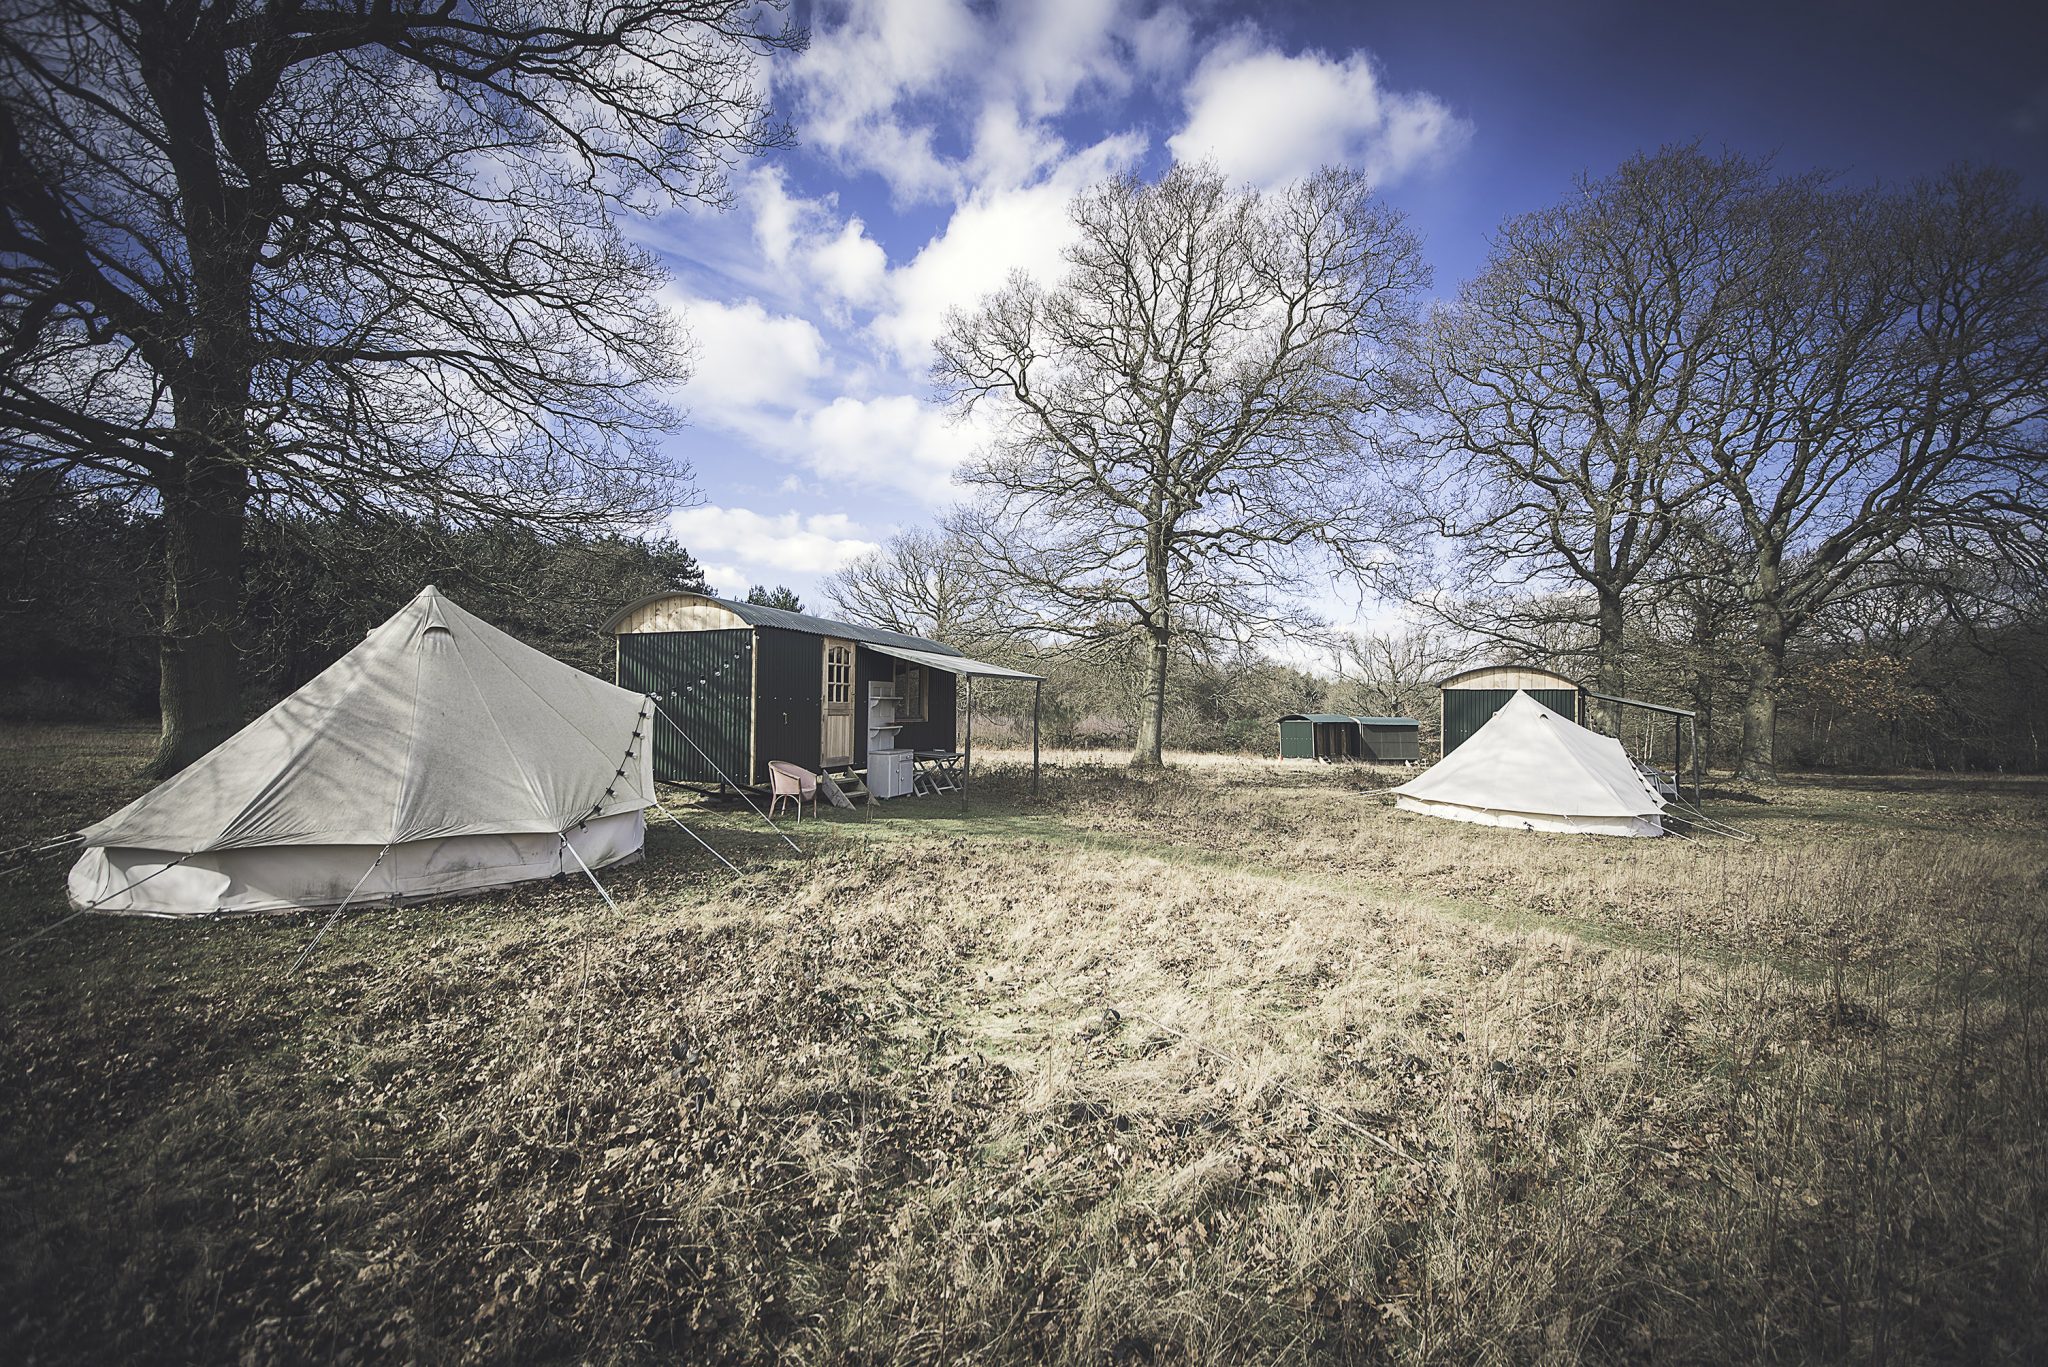 Shepherds huts and tents at the Dreys woodland wedding venue